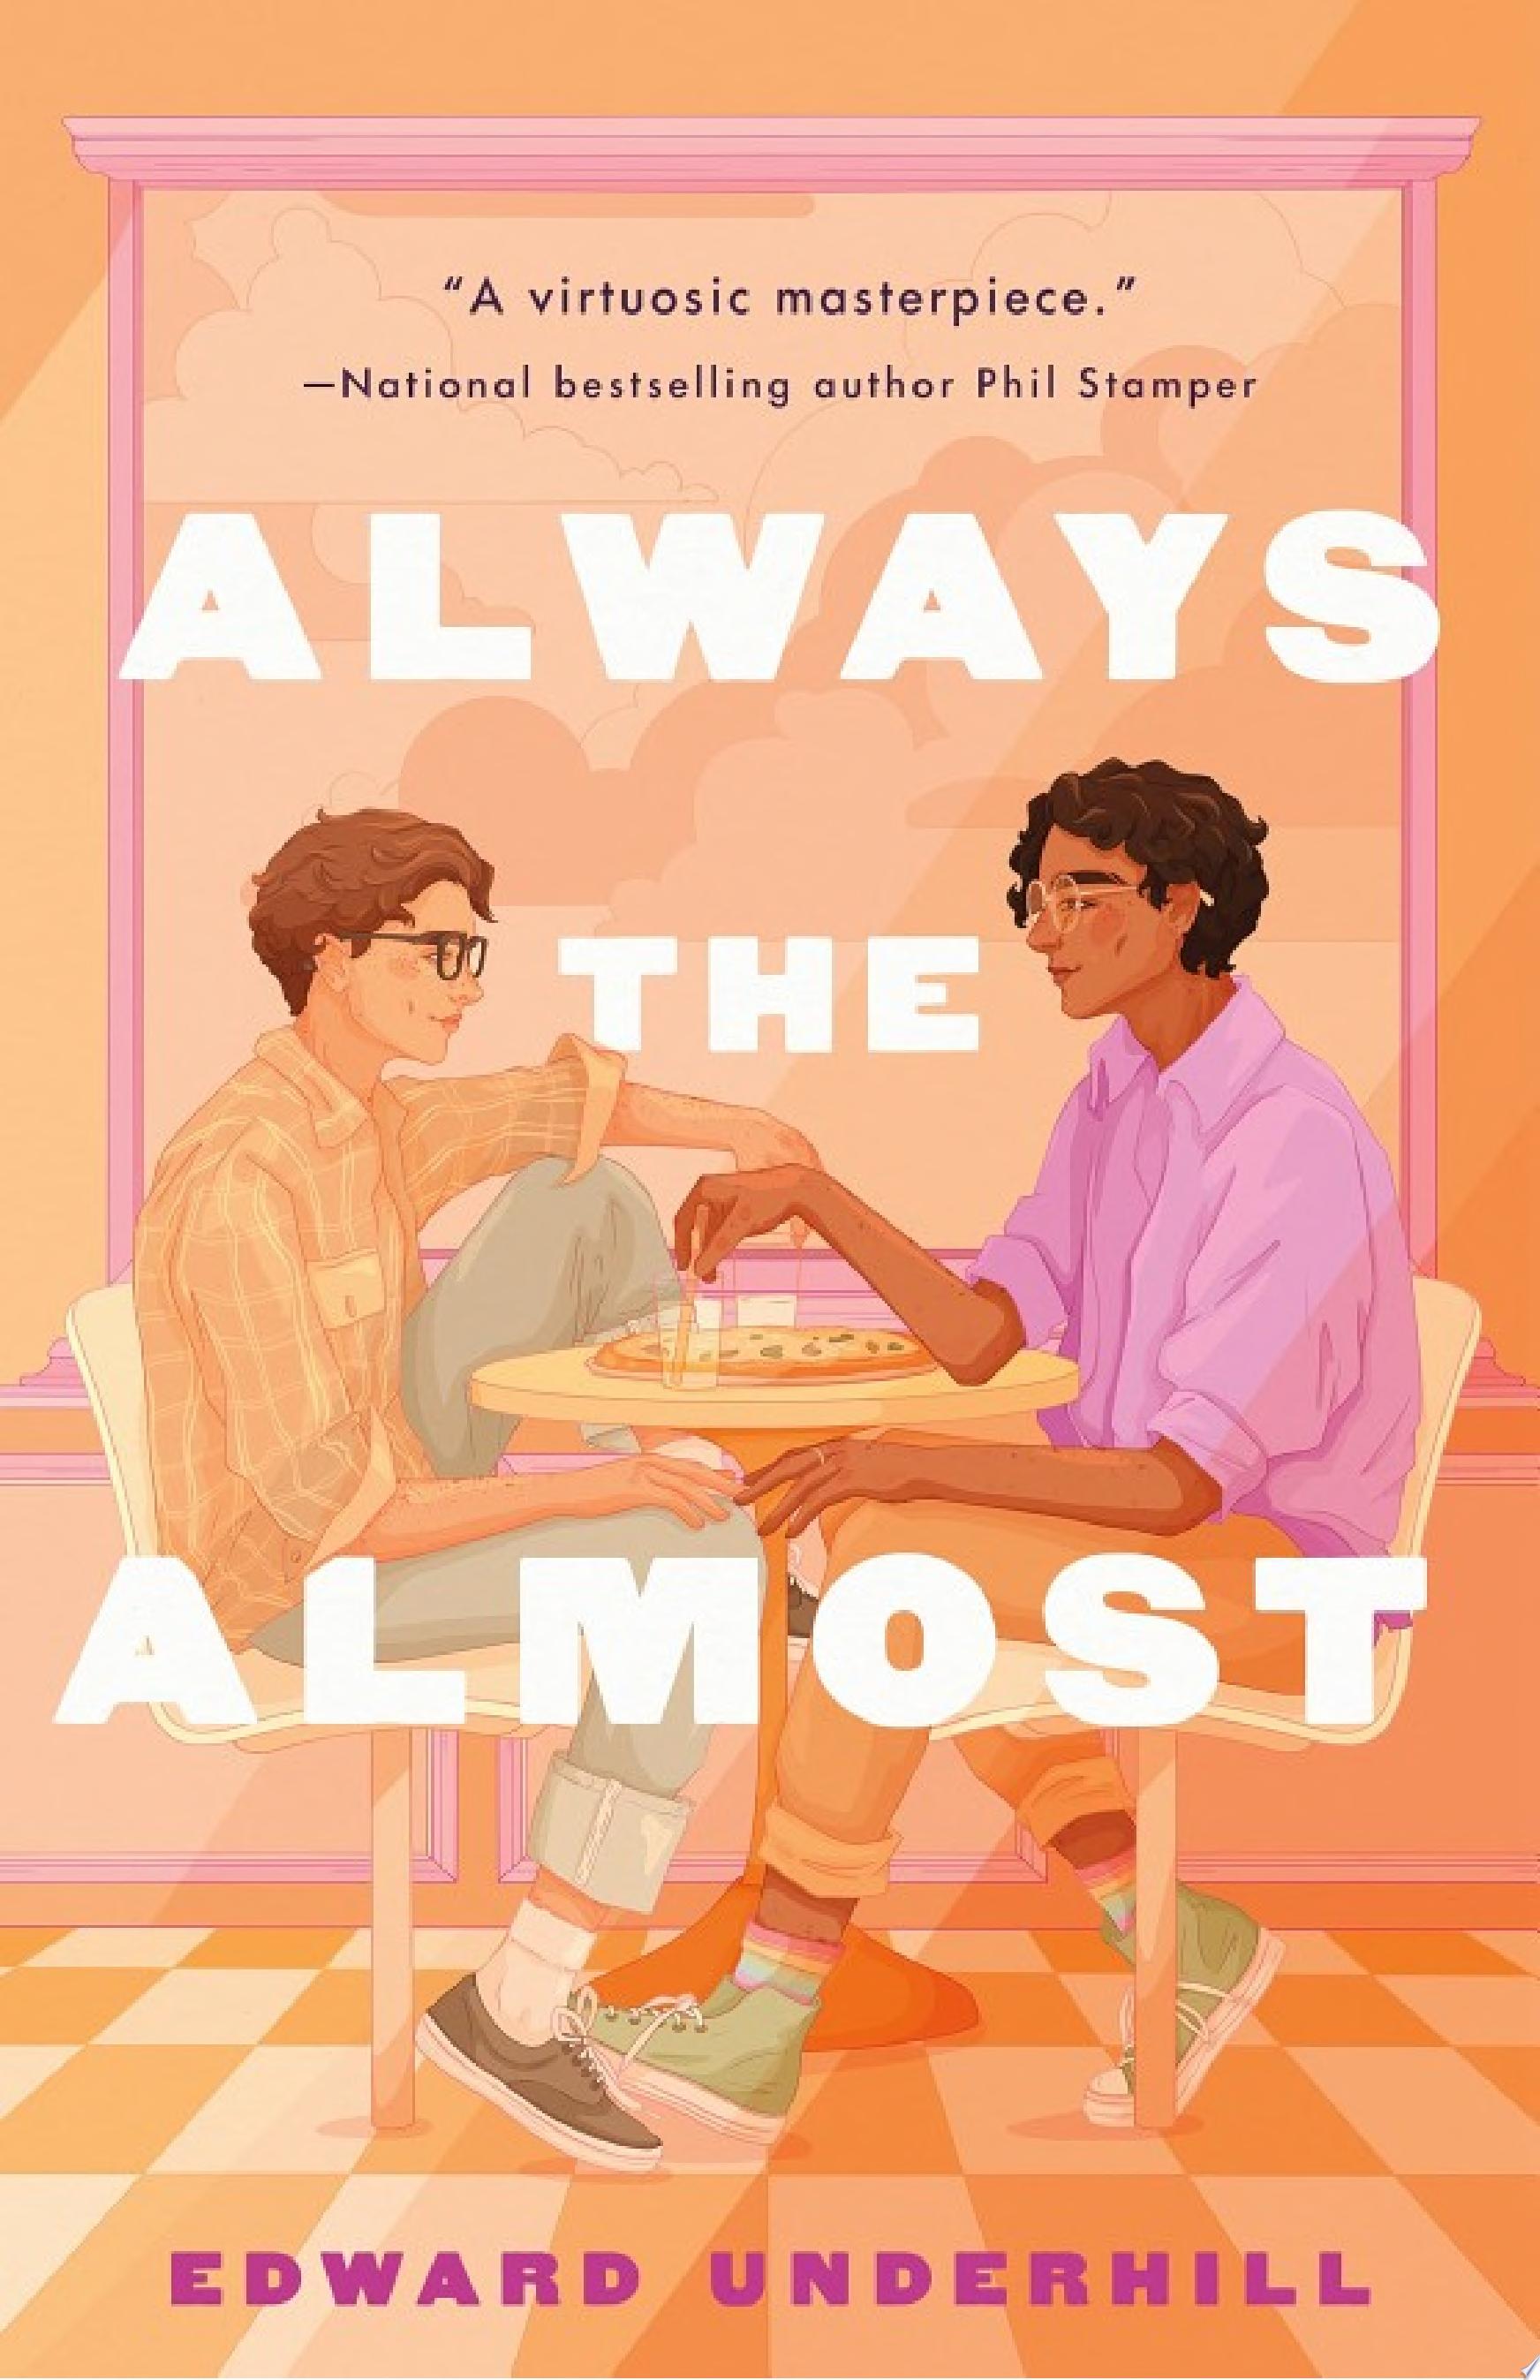 Image for "Always the Almost"